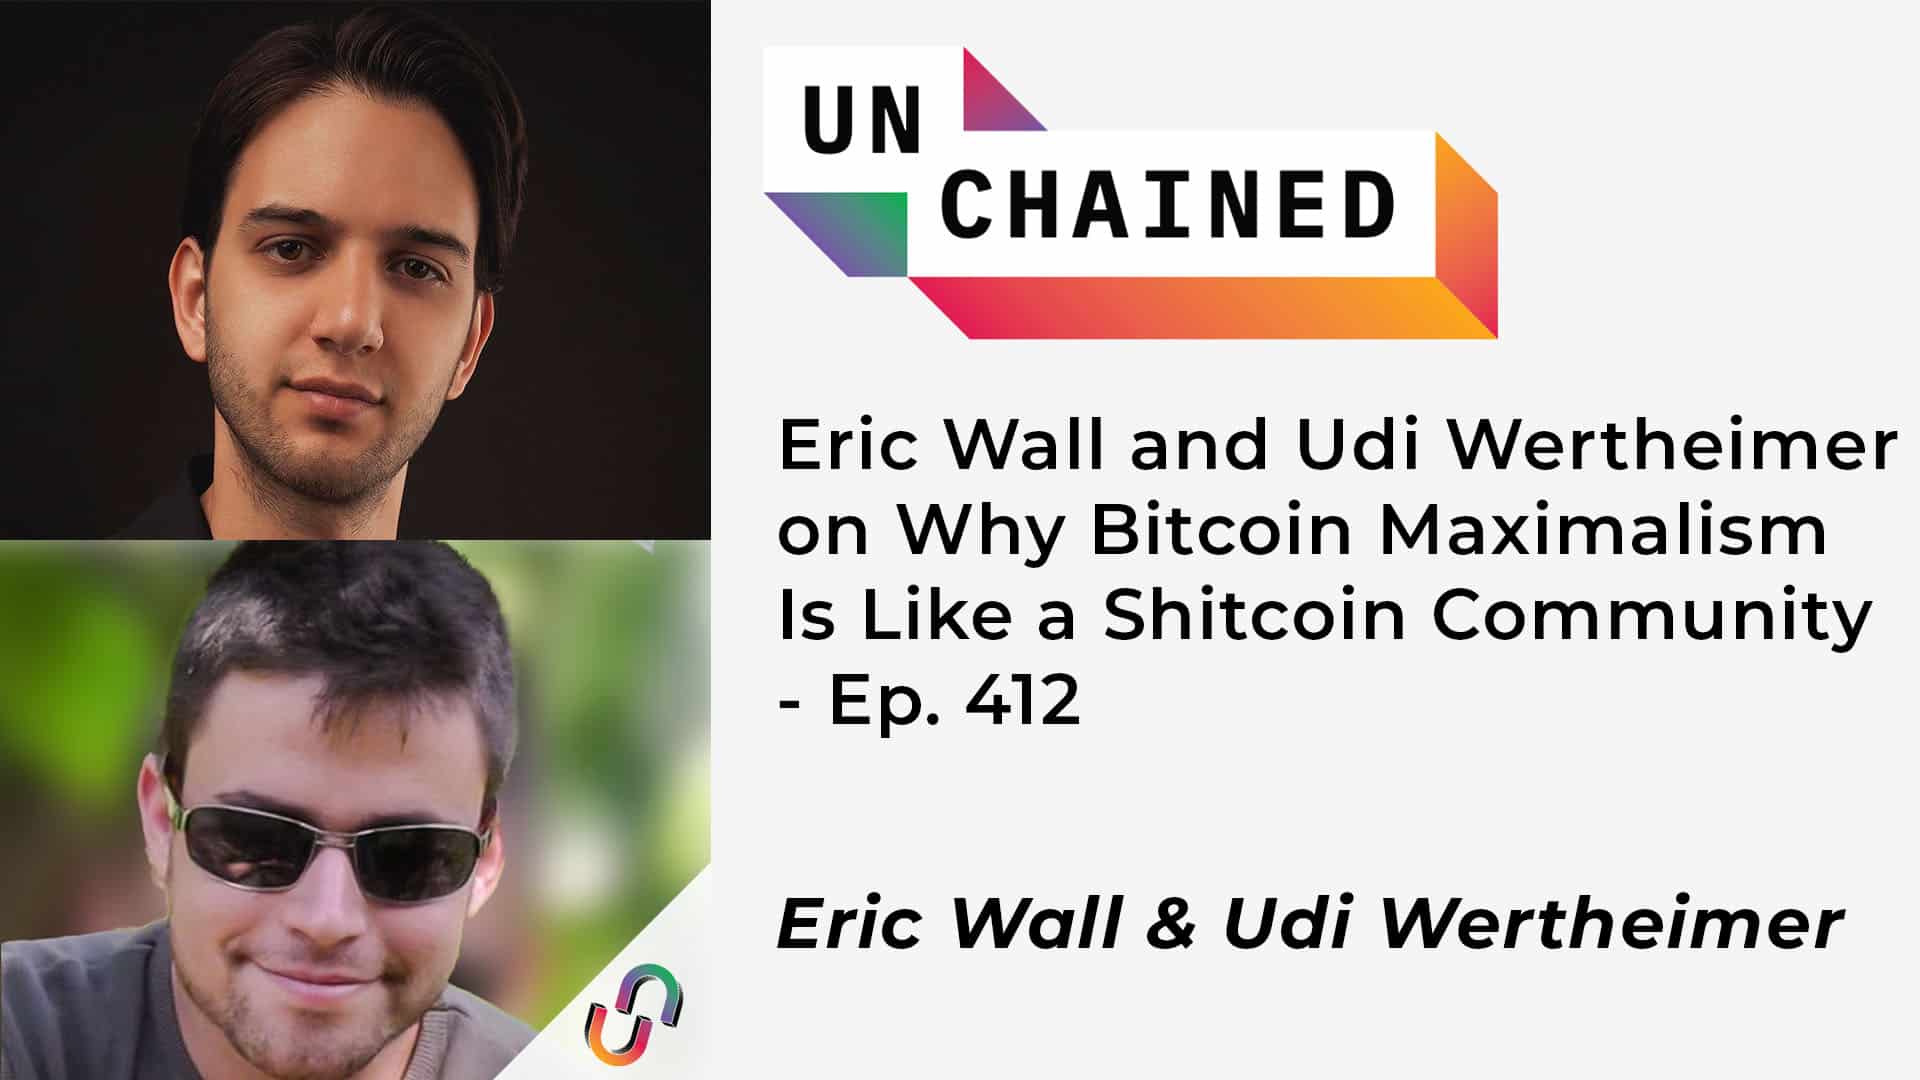 Eric Wall and Udi Wertheimer on Why Bitcoin Maximalism Is Like a Shitcoin Community - Ep. 412